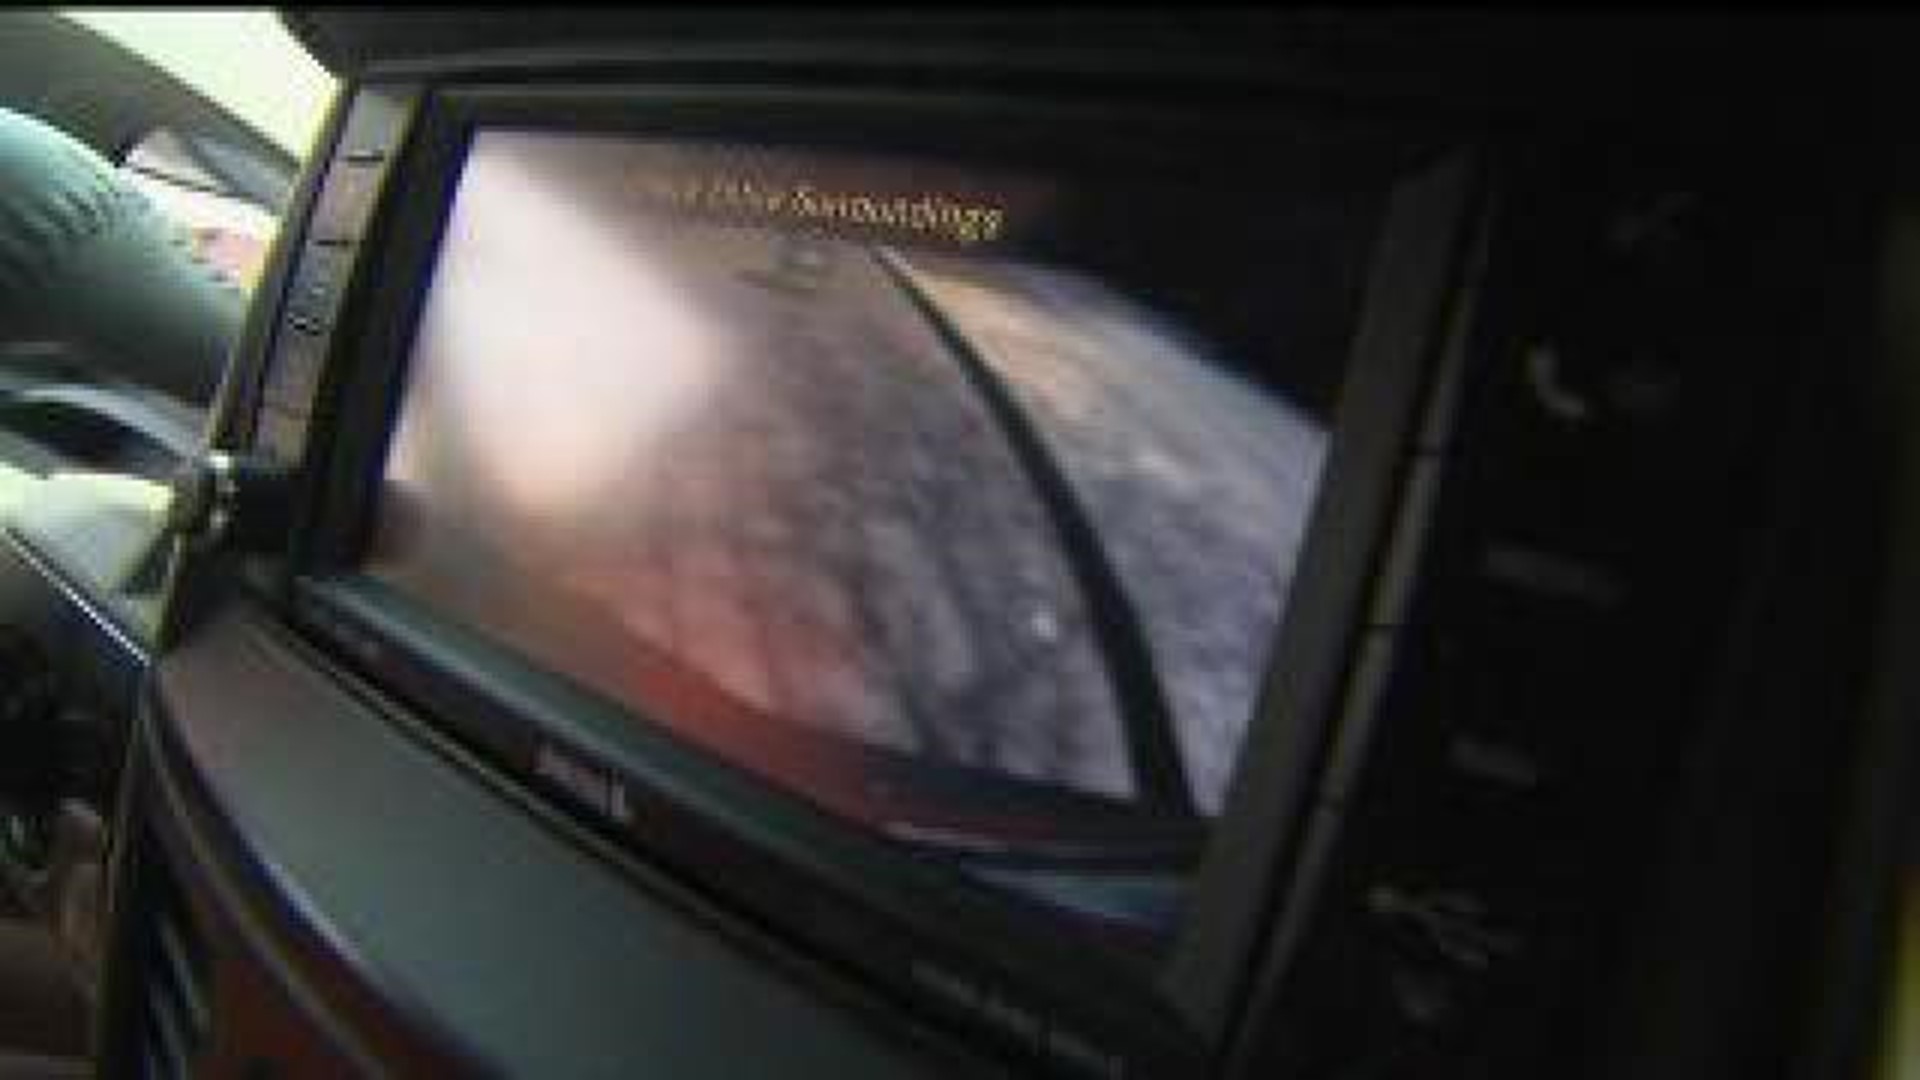 New standards require rearview cameras